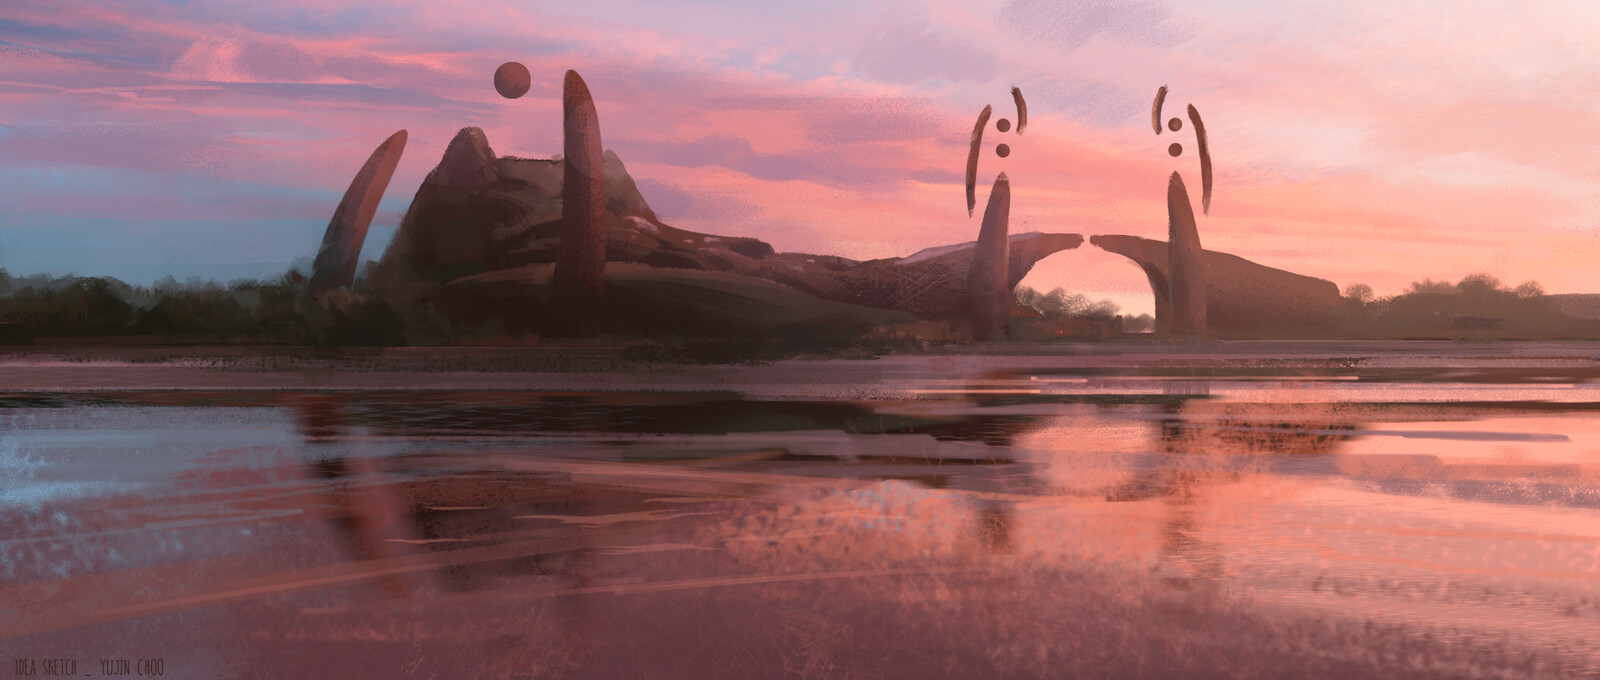 Tranquility idea sketches using digital painting.